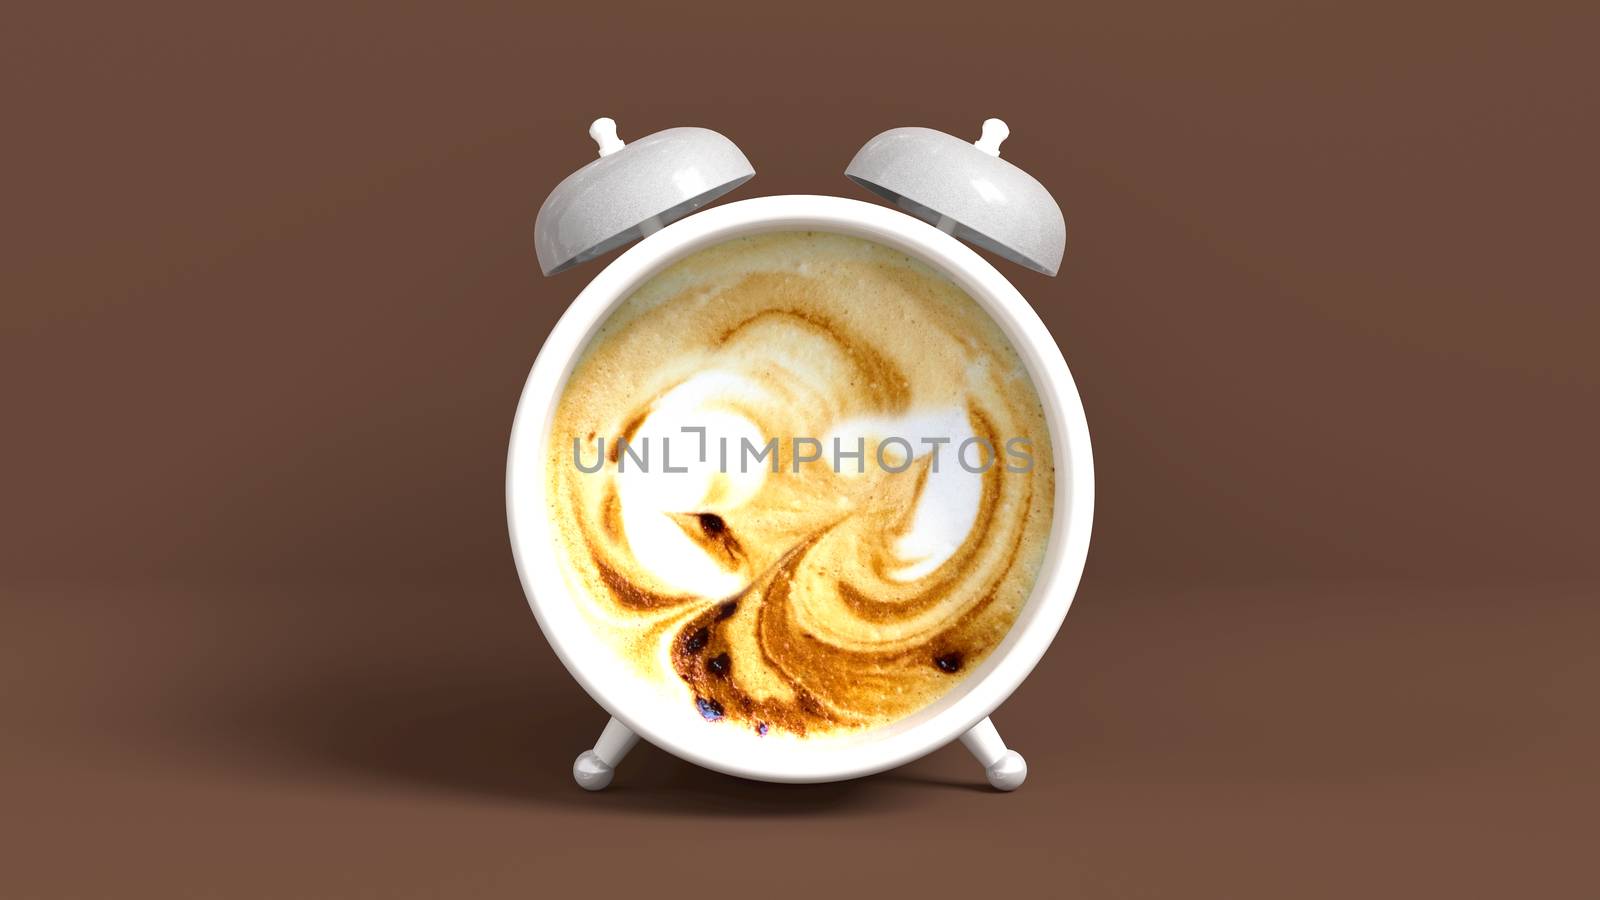 Wake up vintage morning shaped coffee. Concept illustrating that it's time to have coffee. 3D rendering.